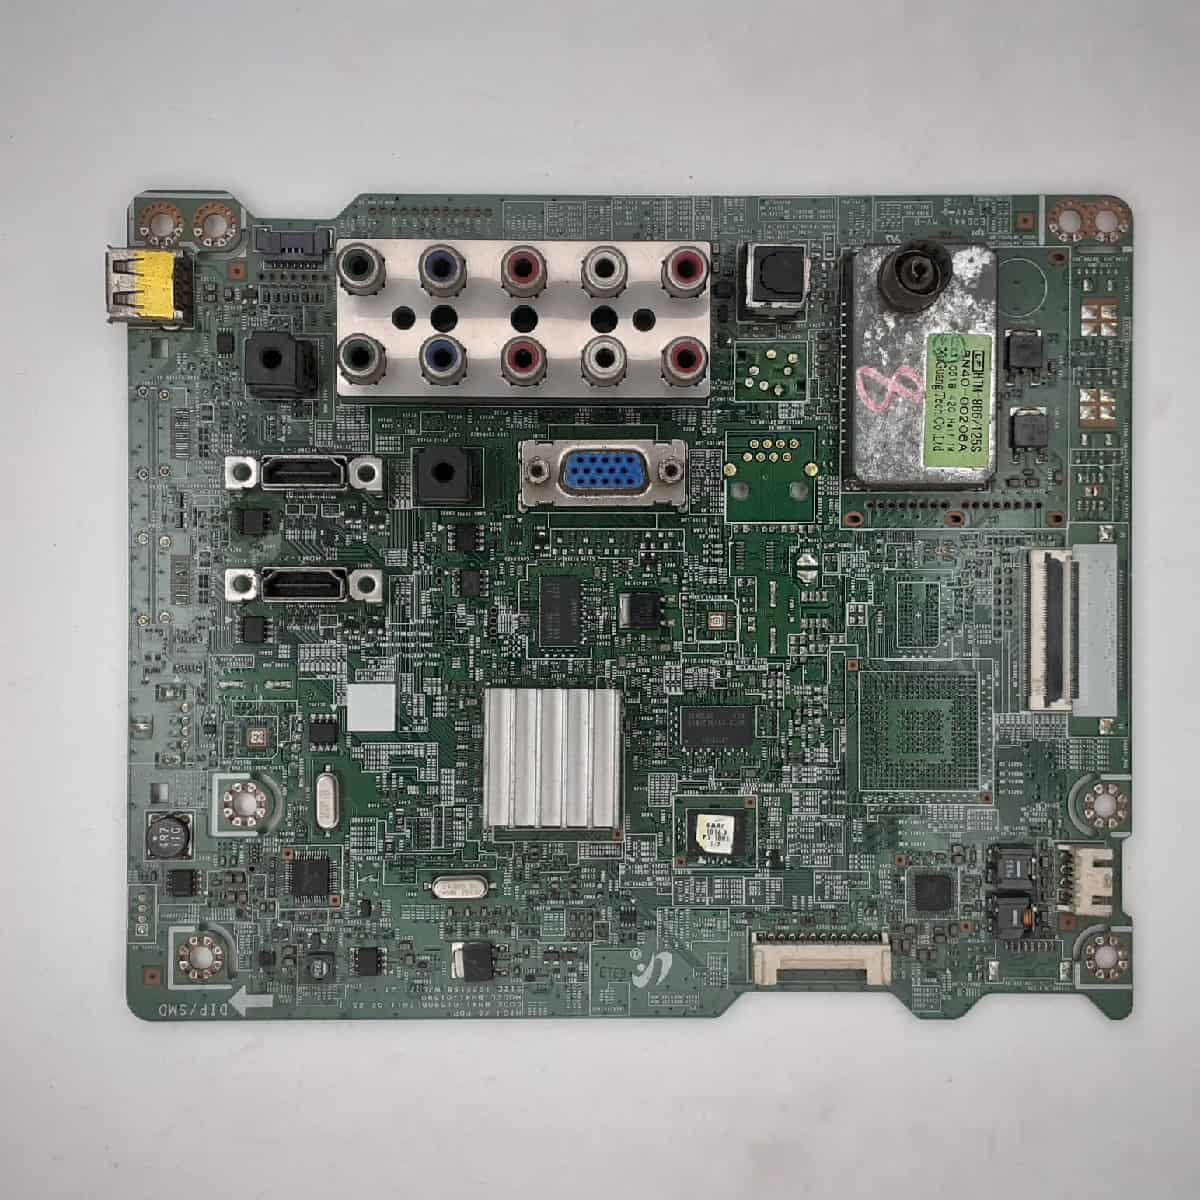 PS43450 SONY MOTHERBOARD FOR LED TV